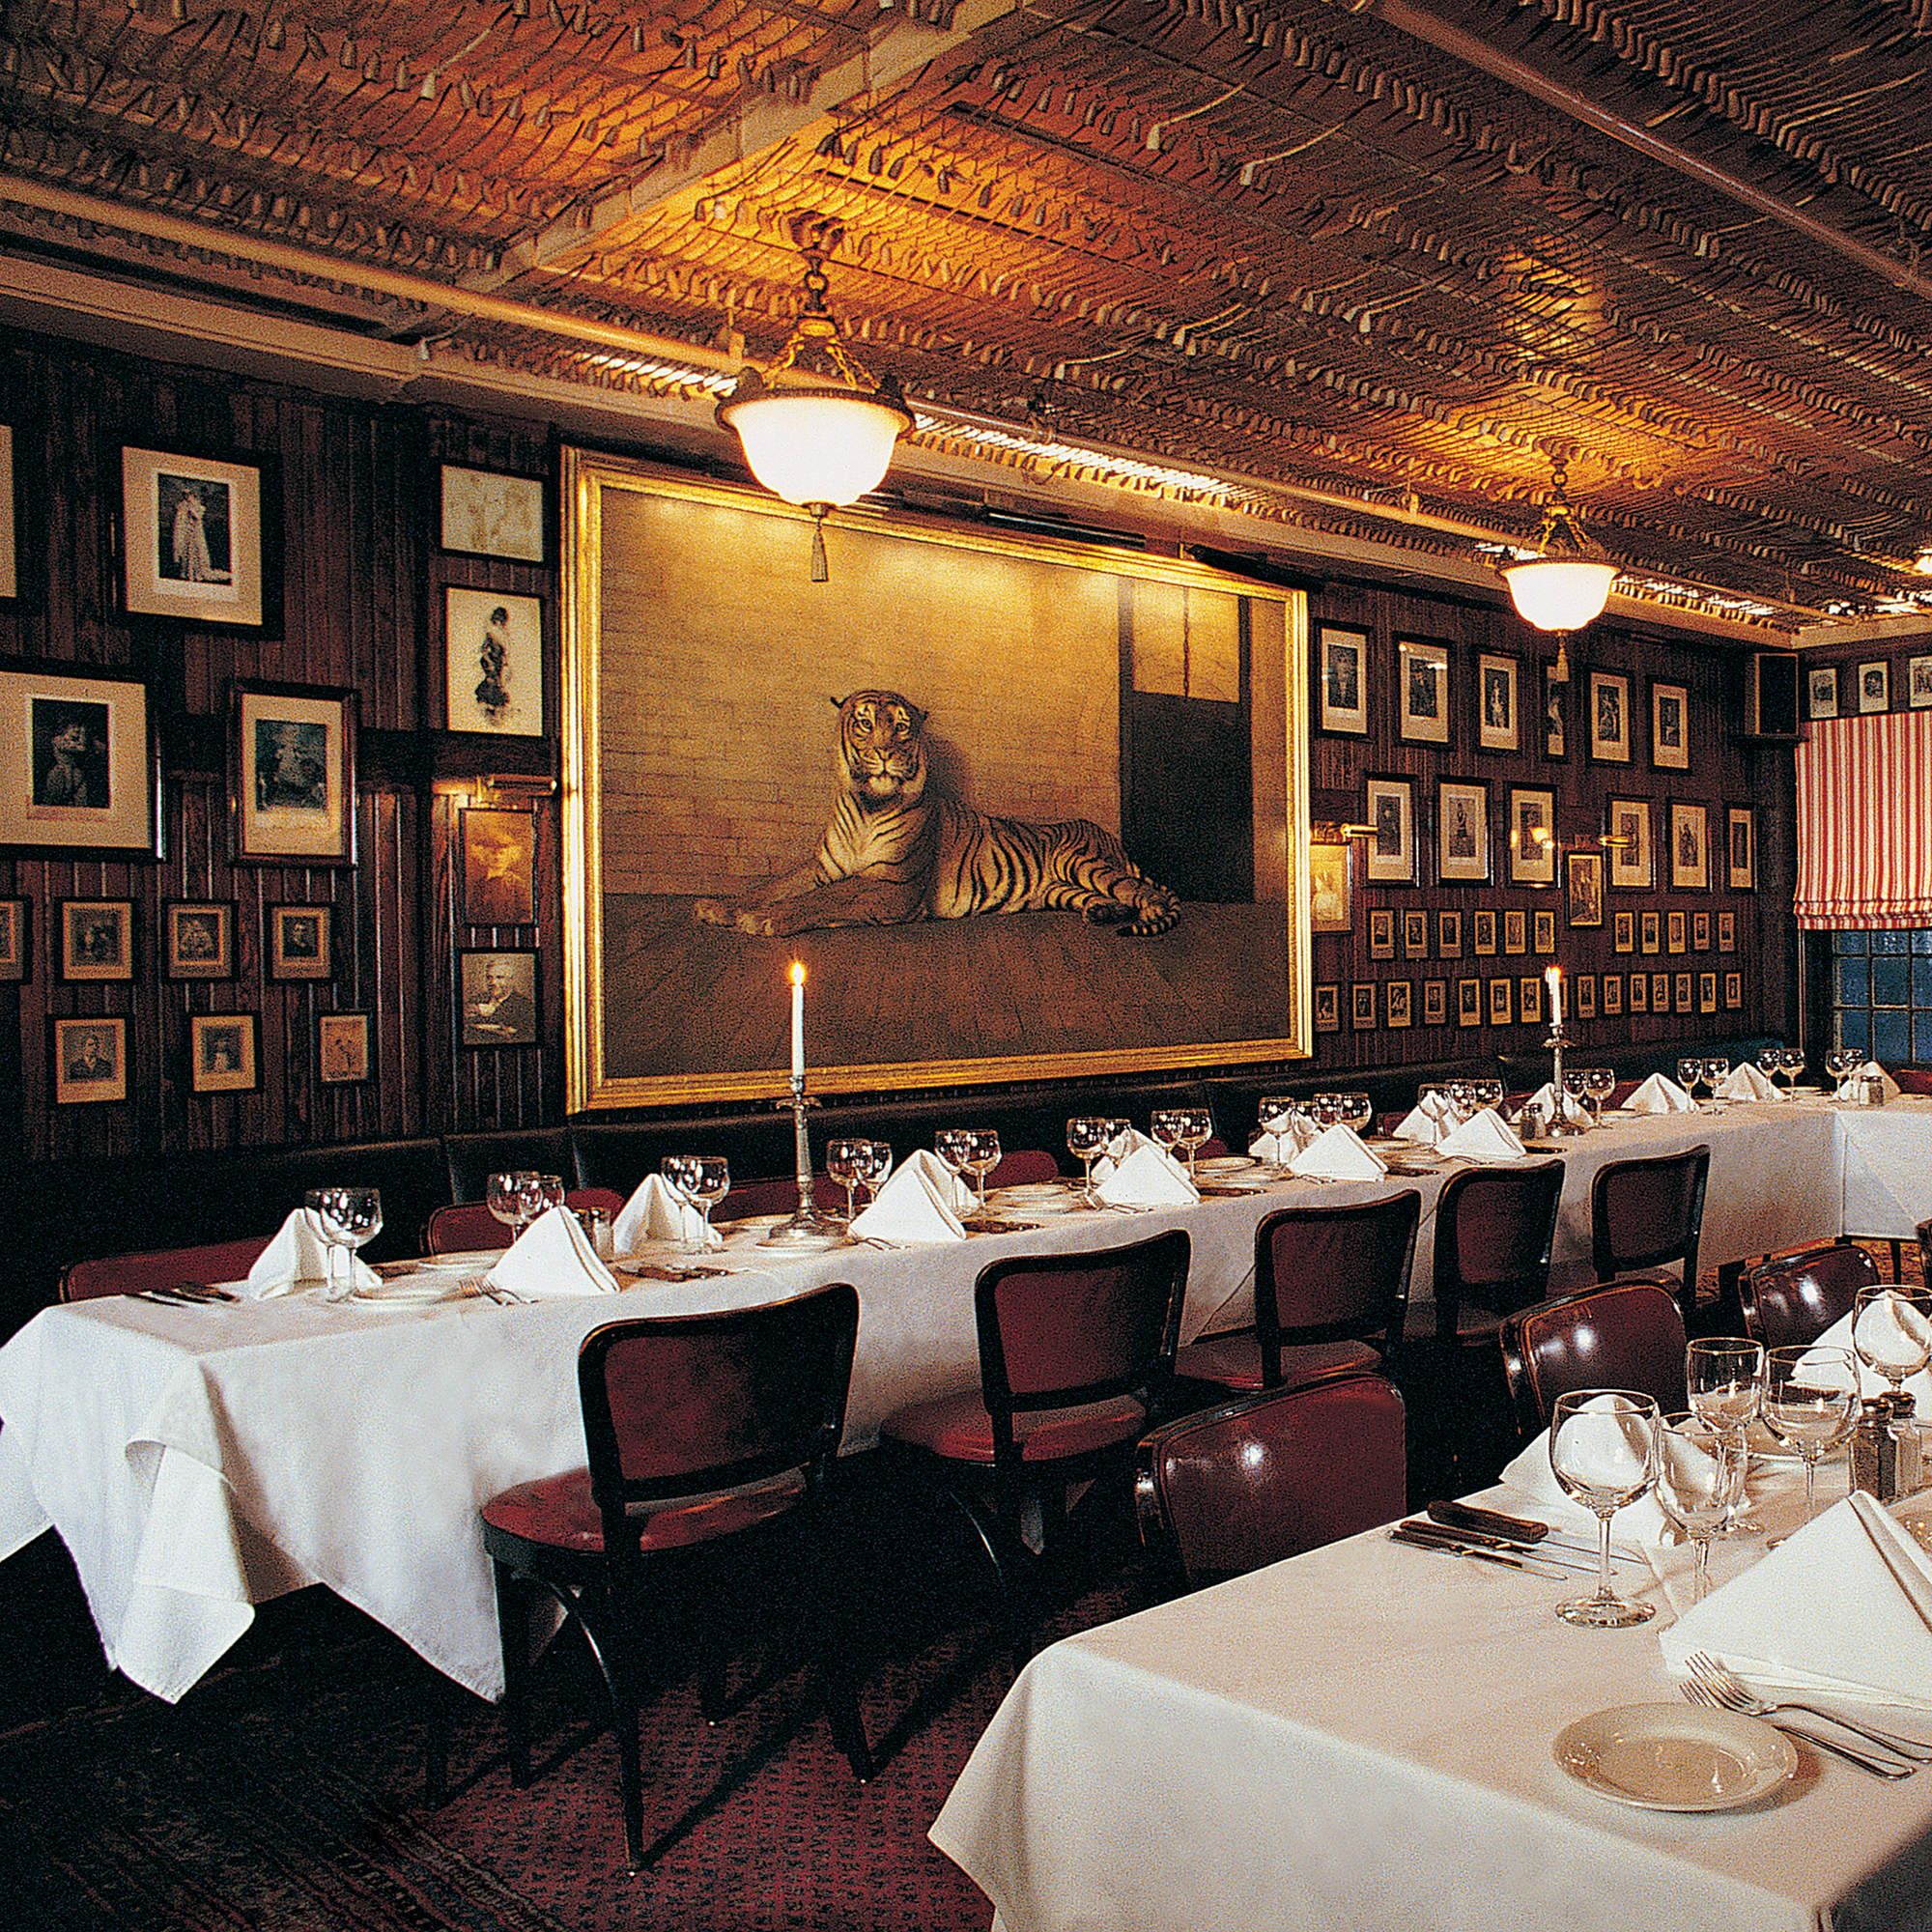 The 13 Best Steakhouses in NYC